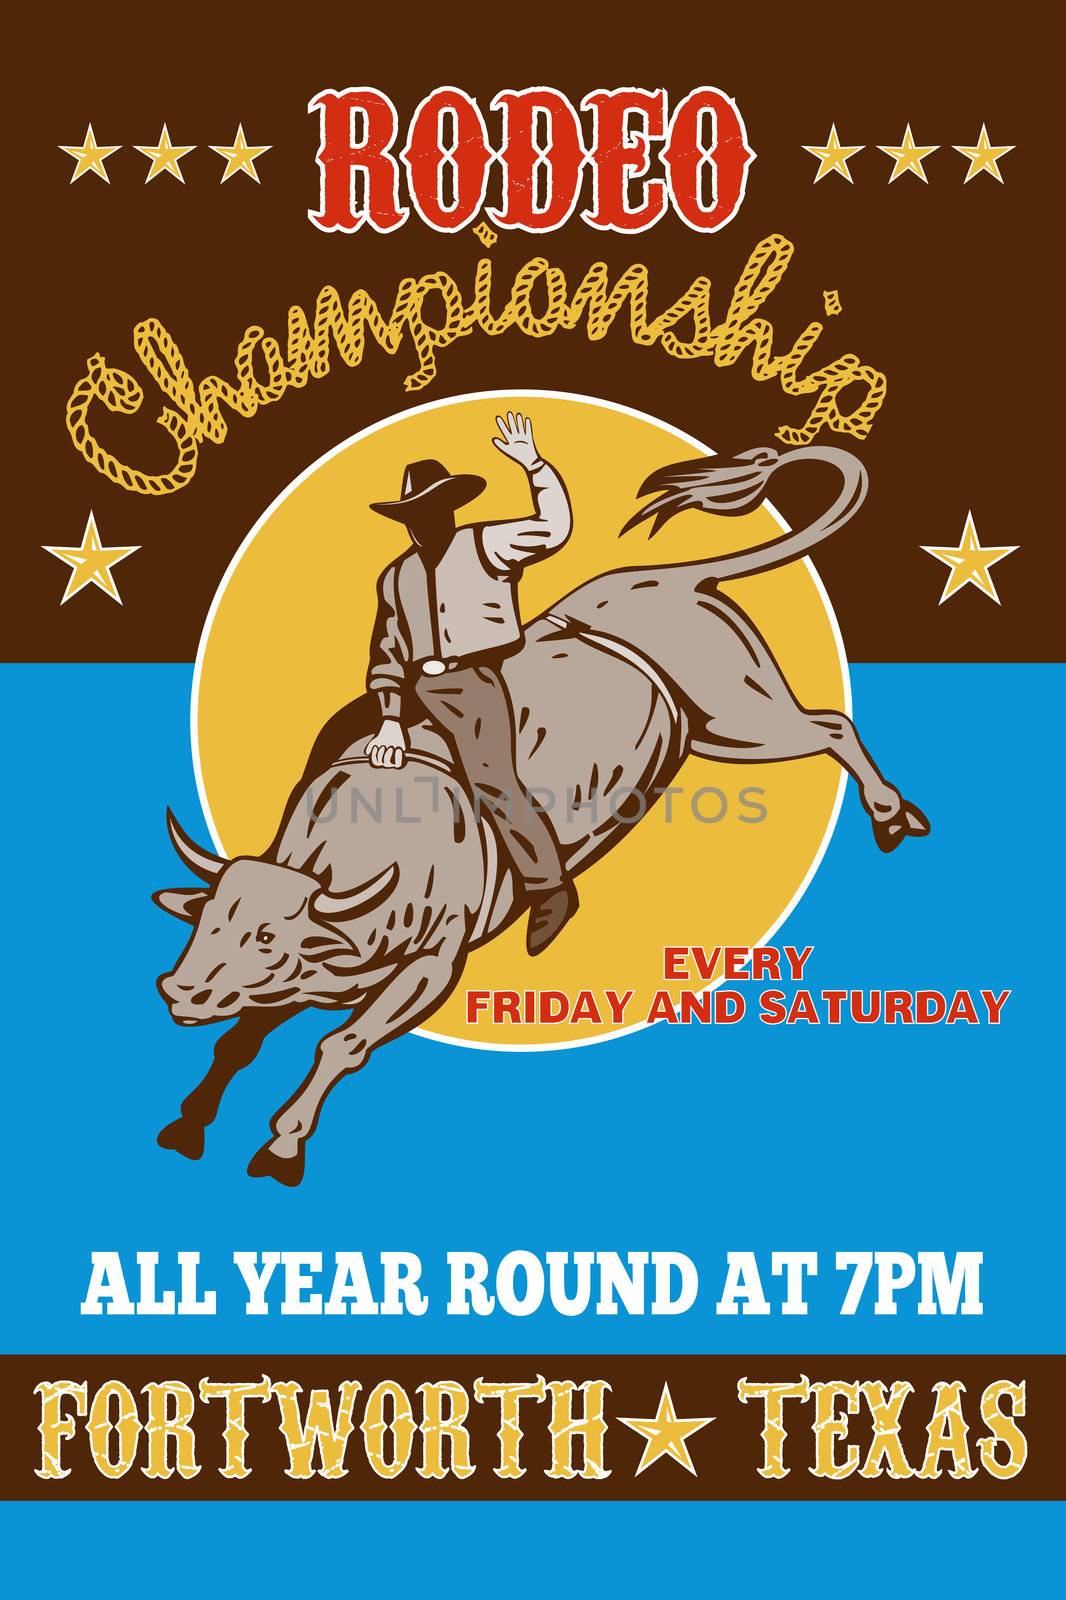 retro style illustration of a Poster showing an American  Rodeo Cowboy riding  a bull bucking jumping with sun in background and words  "Rodeo championship all year round at Fort Worth, Texas USA